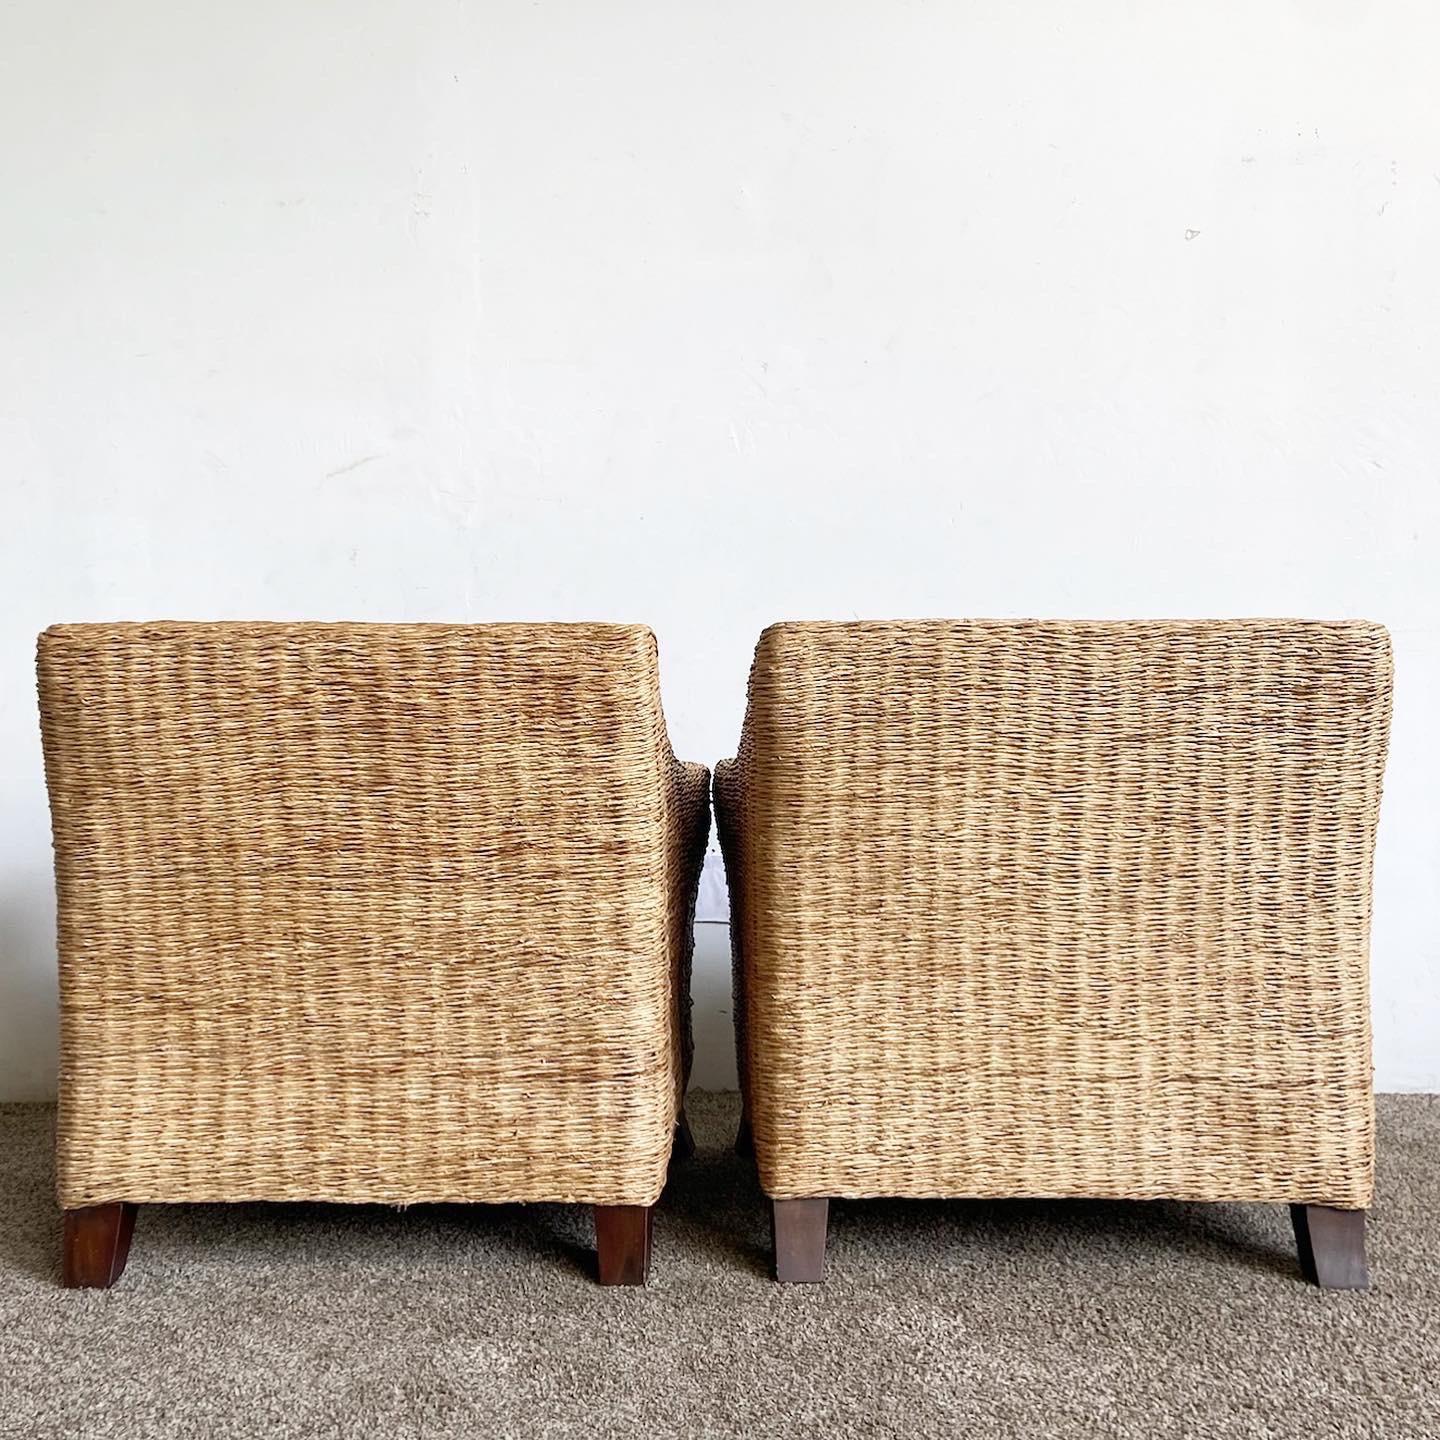 Boho Chic Wicker Arm Chairs With Brown Cushions In Good Condition For Sale In Delray Beach, FL